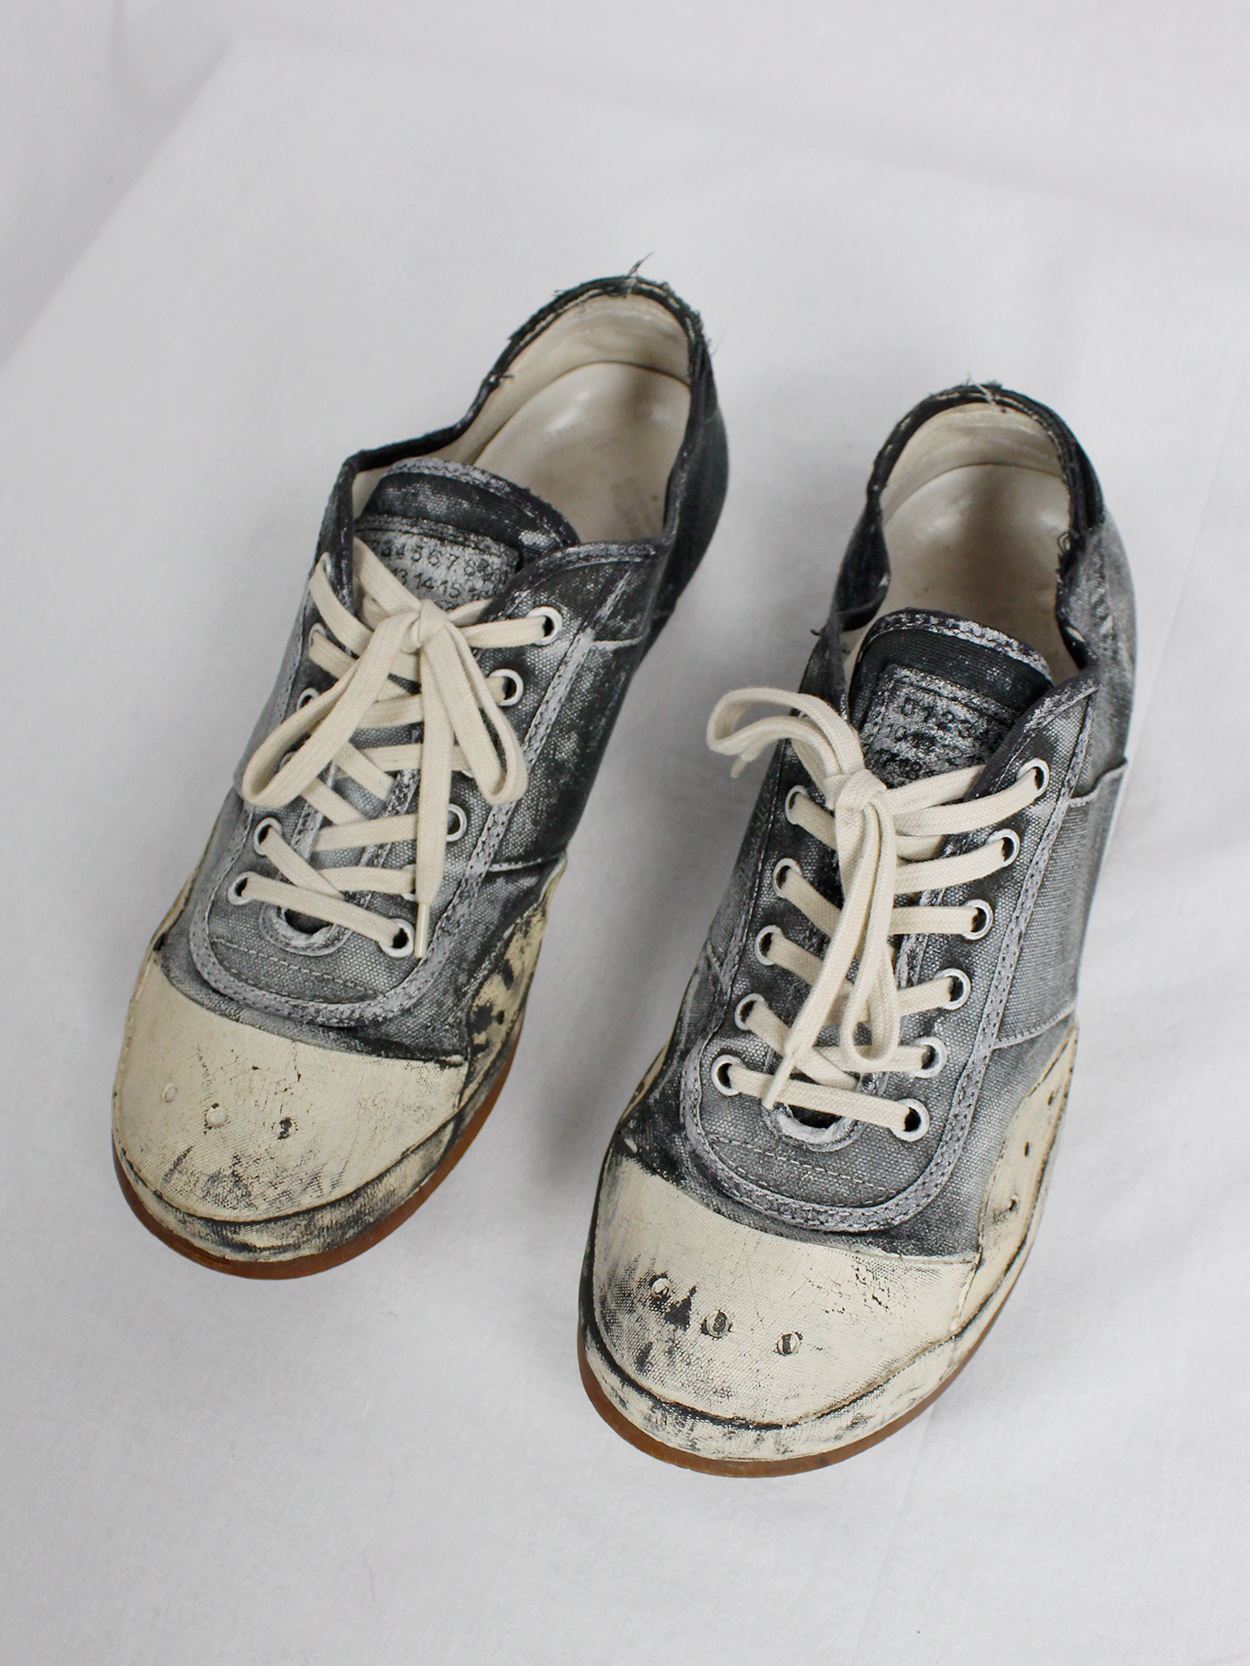 Maison Martin Margiela black and blue canvas sneakers painted in white ...